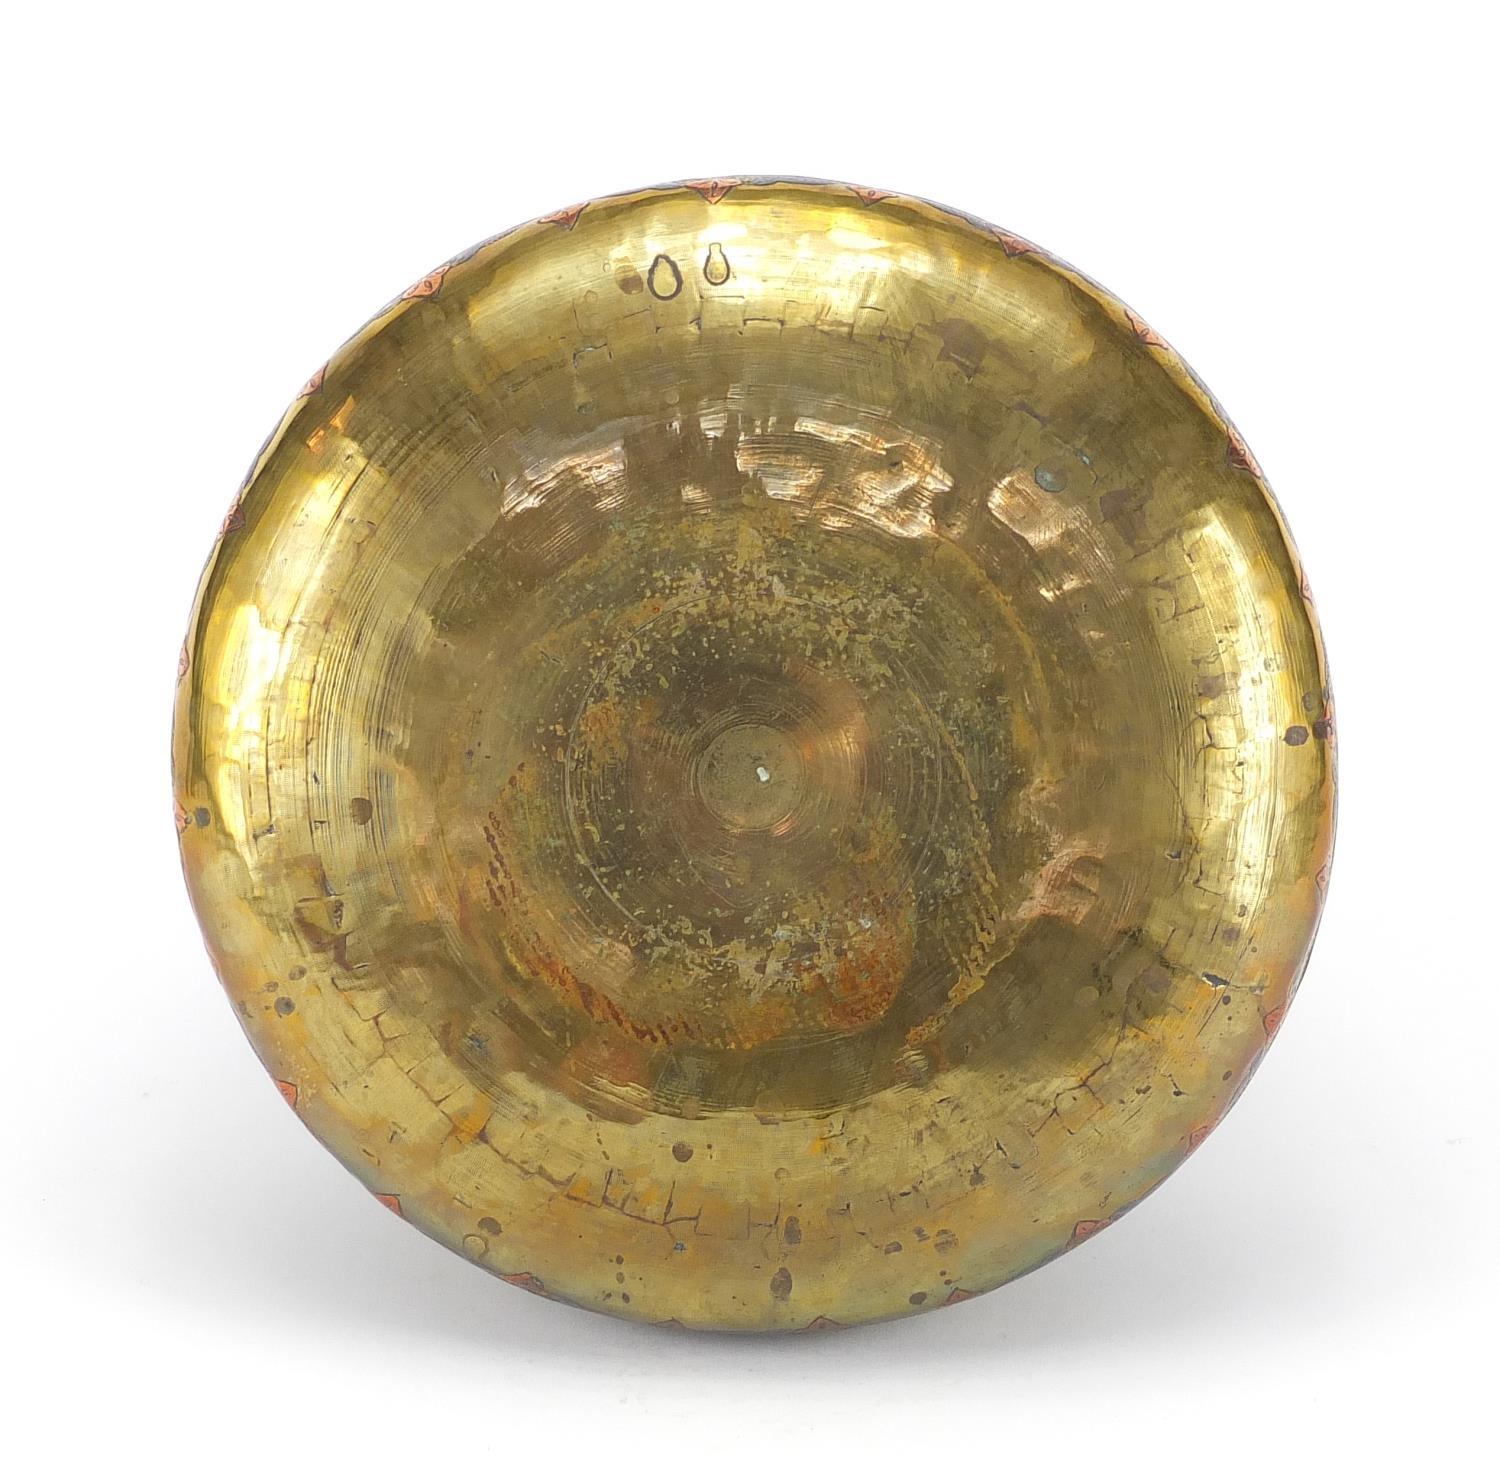 Cairoware brass bowl with silver inlay decorated with script and floral motifs, 25cm in diameter : - Image 5 of 5